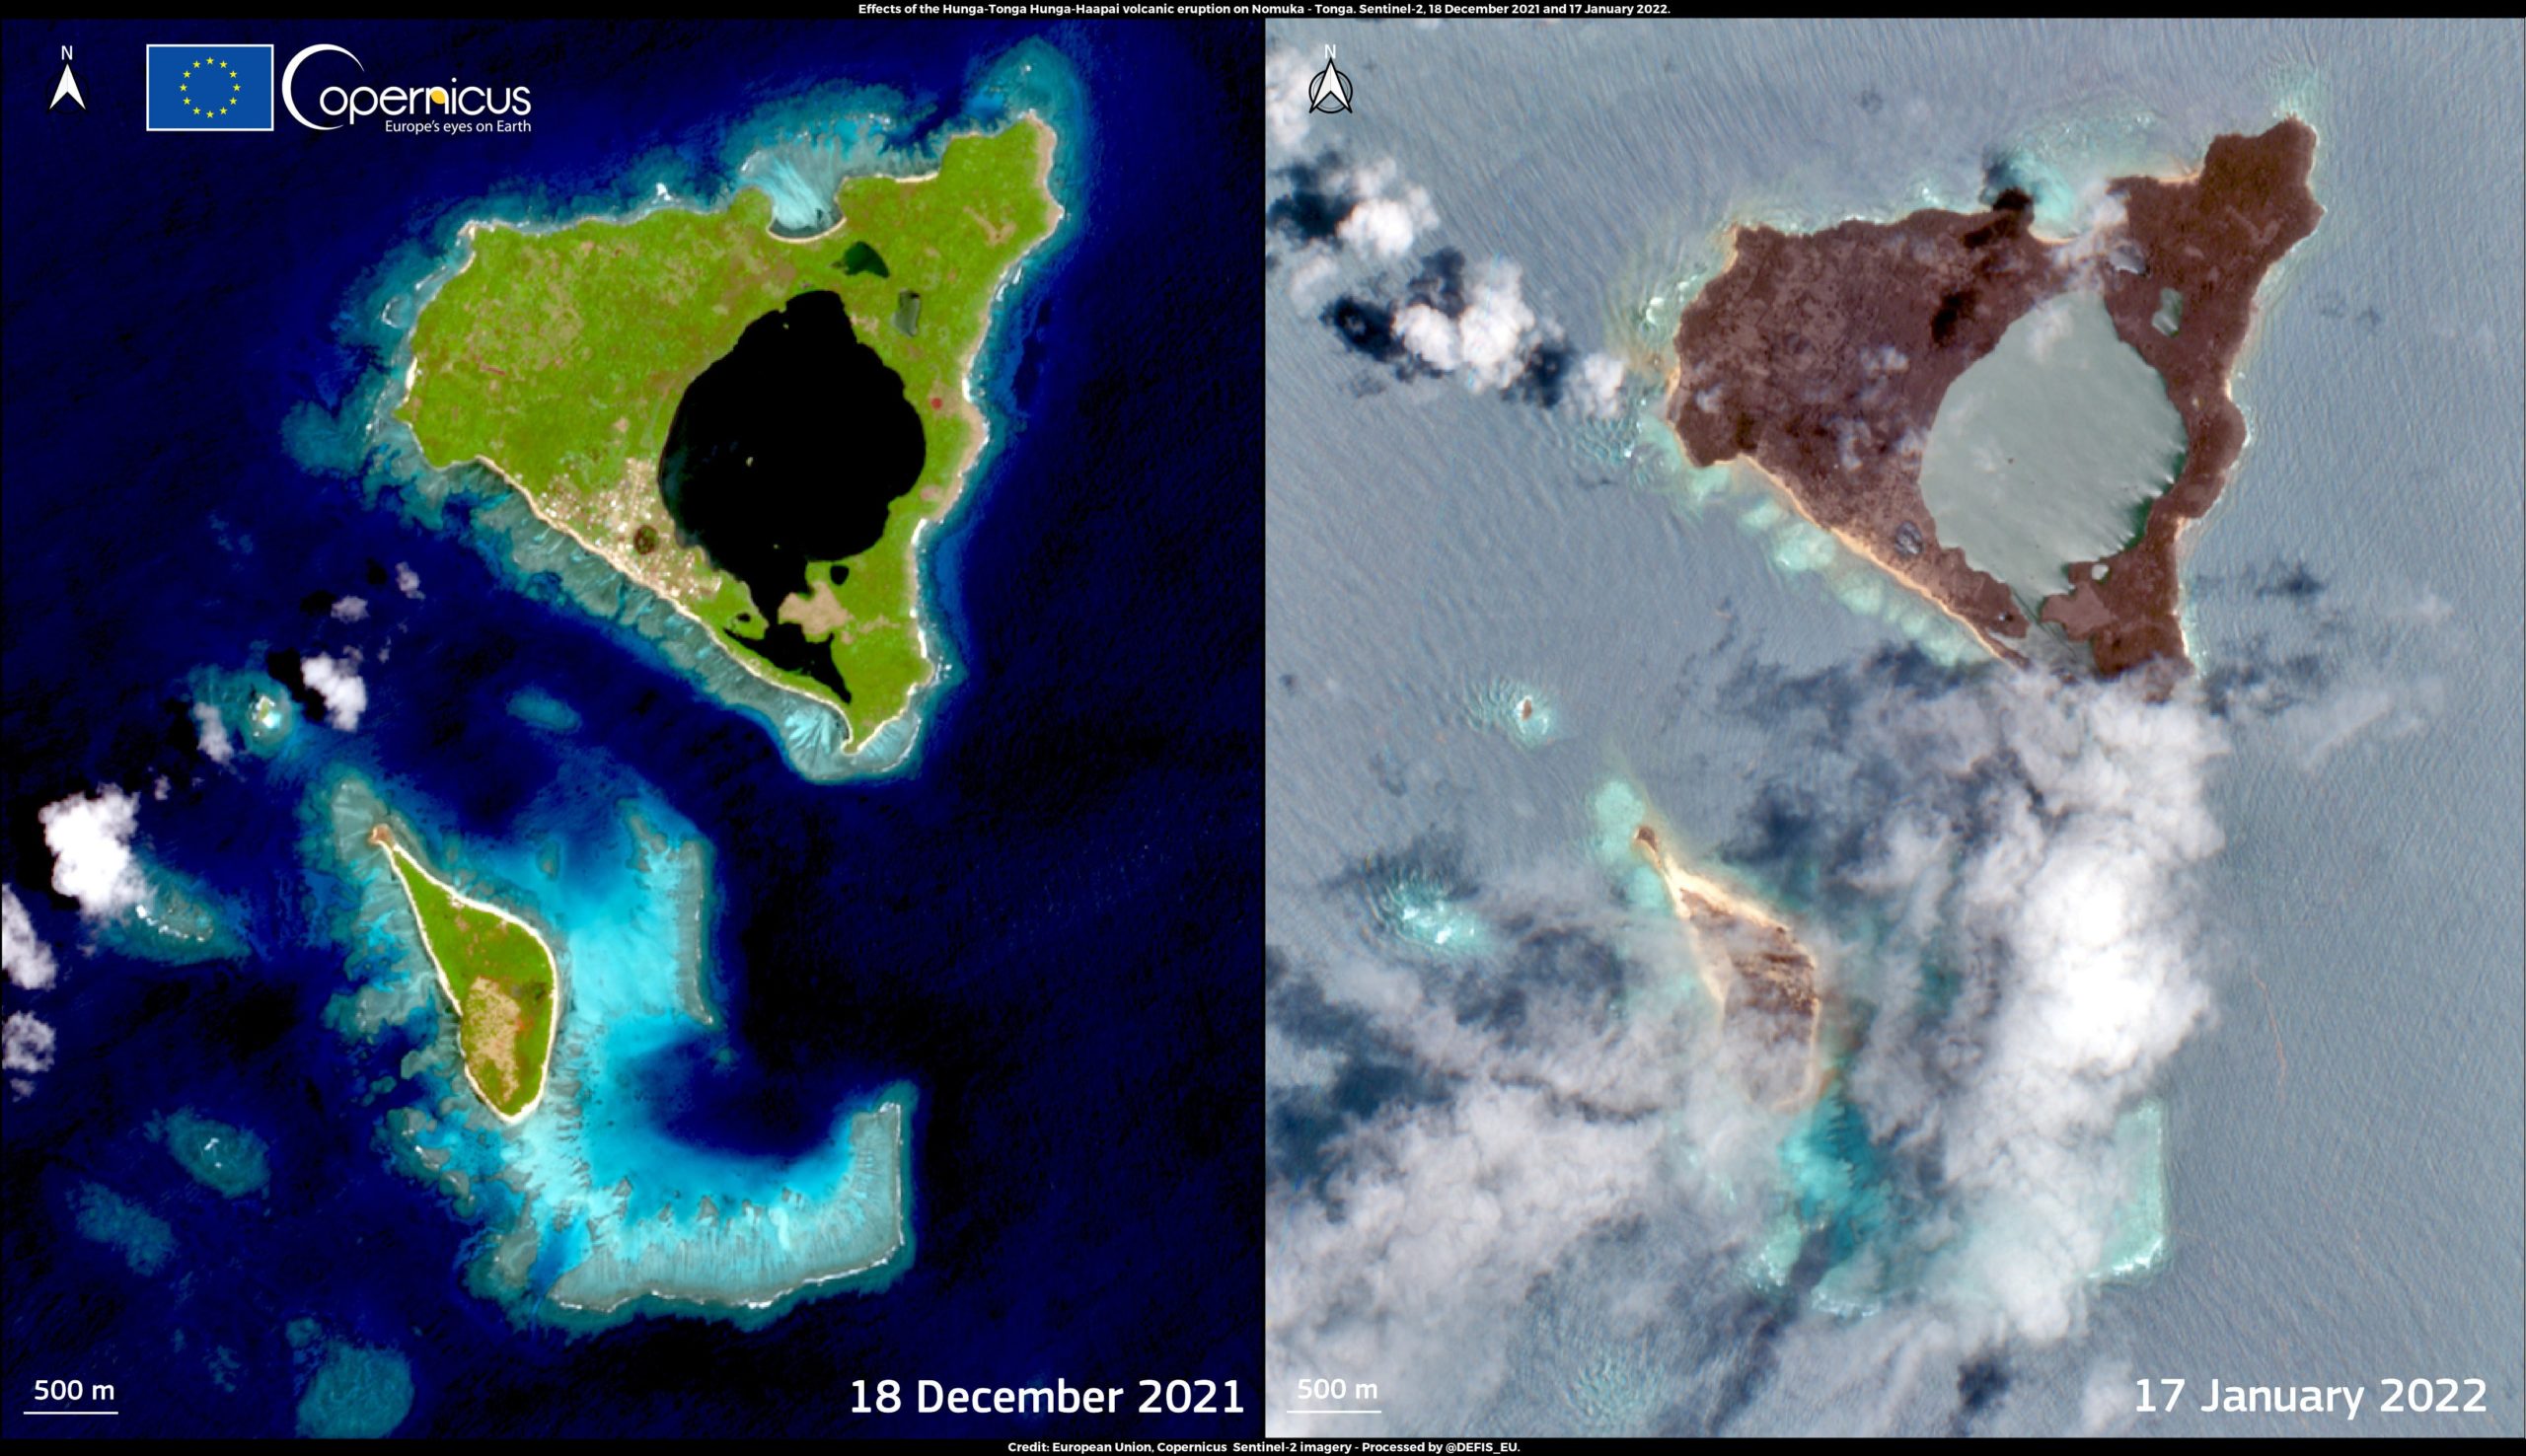 The impact of the Tongan volnica eruption can be seen on the island of Nomuka when comparing before and after satellite images. (Image: European Union, Copernicus Sentinel-2)